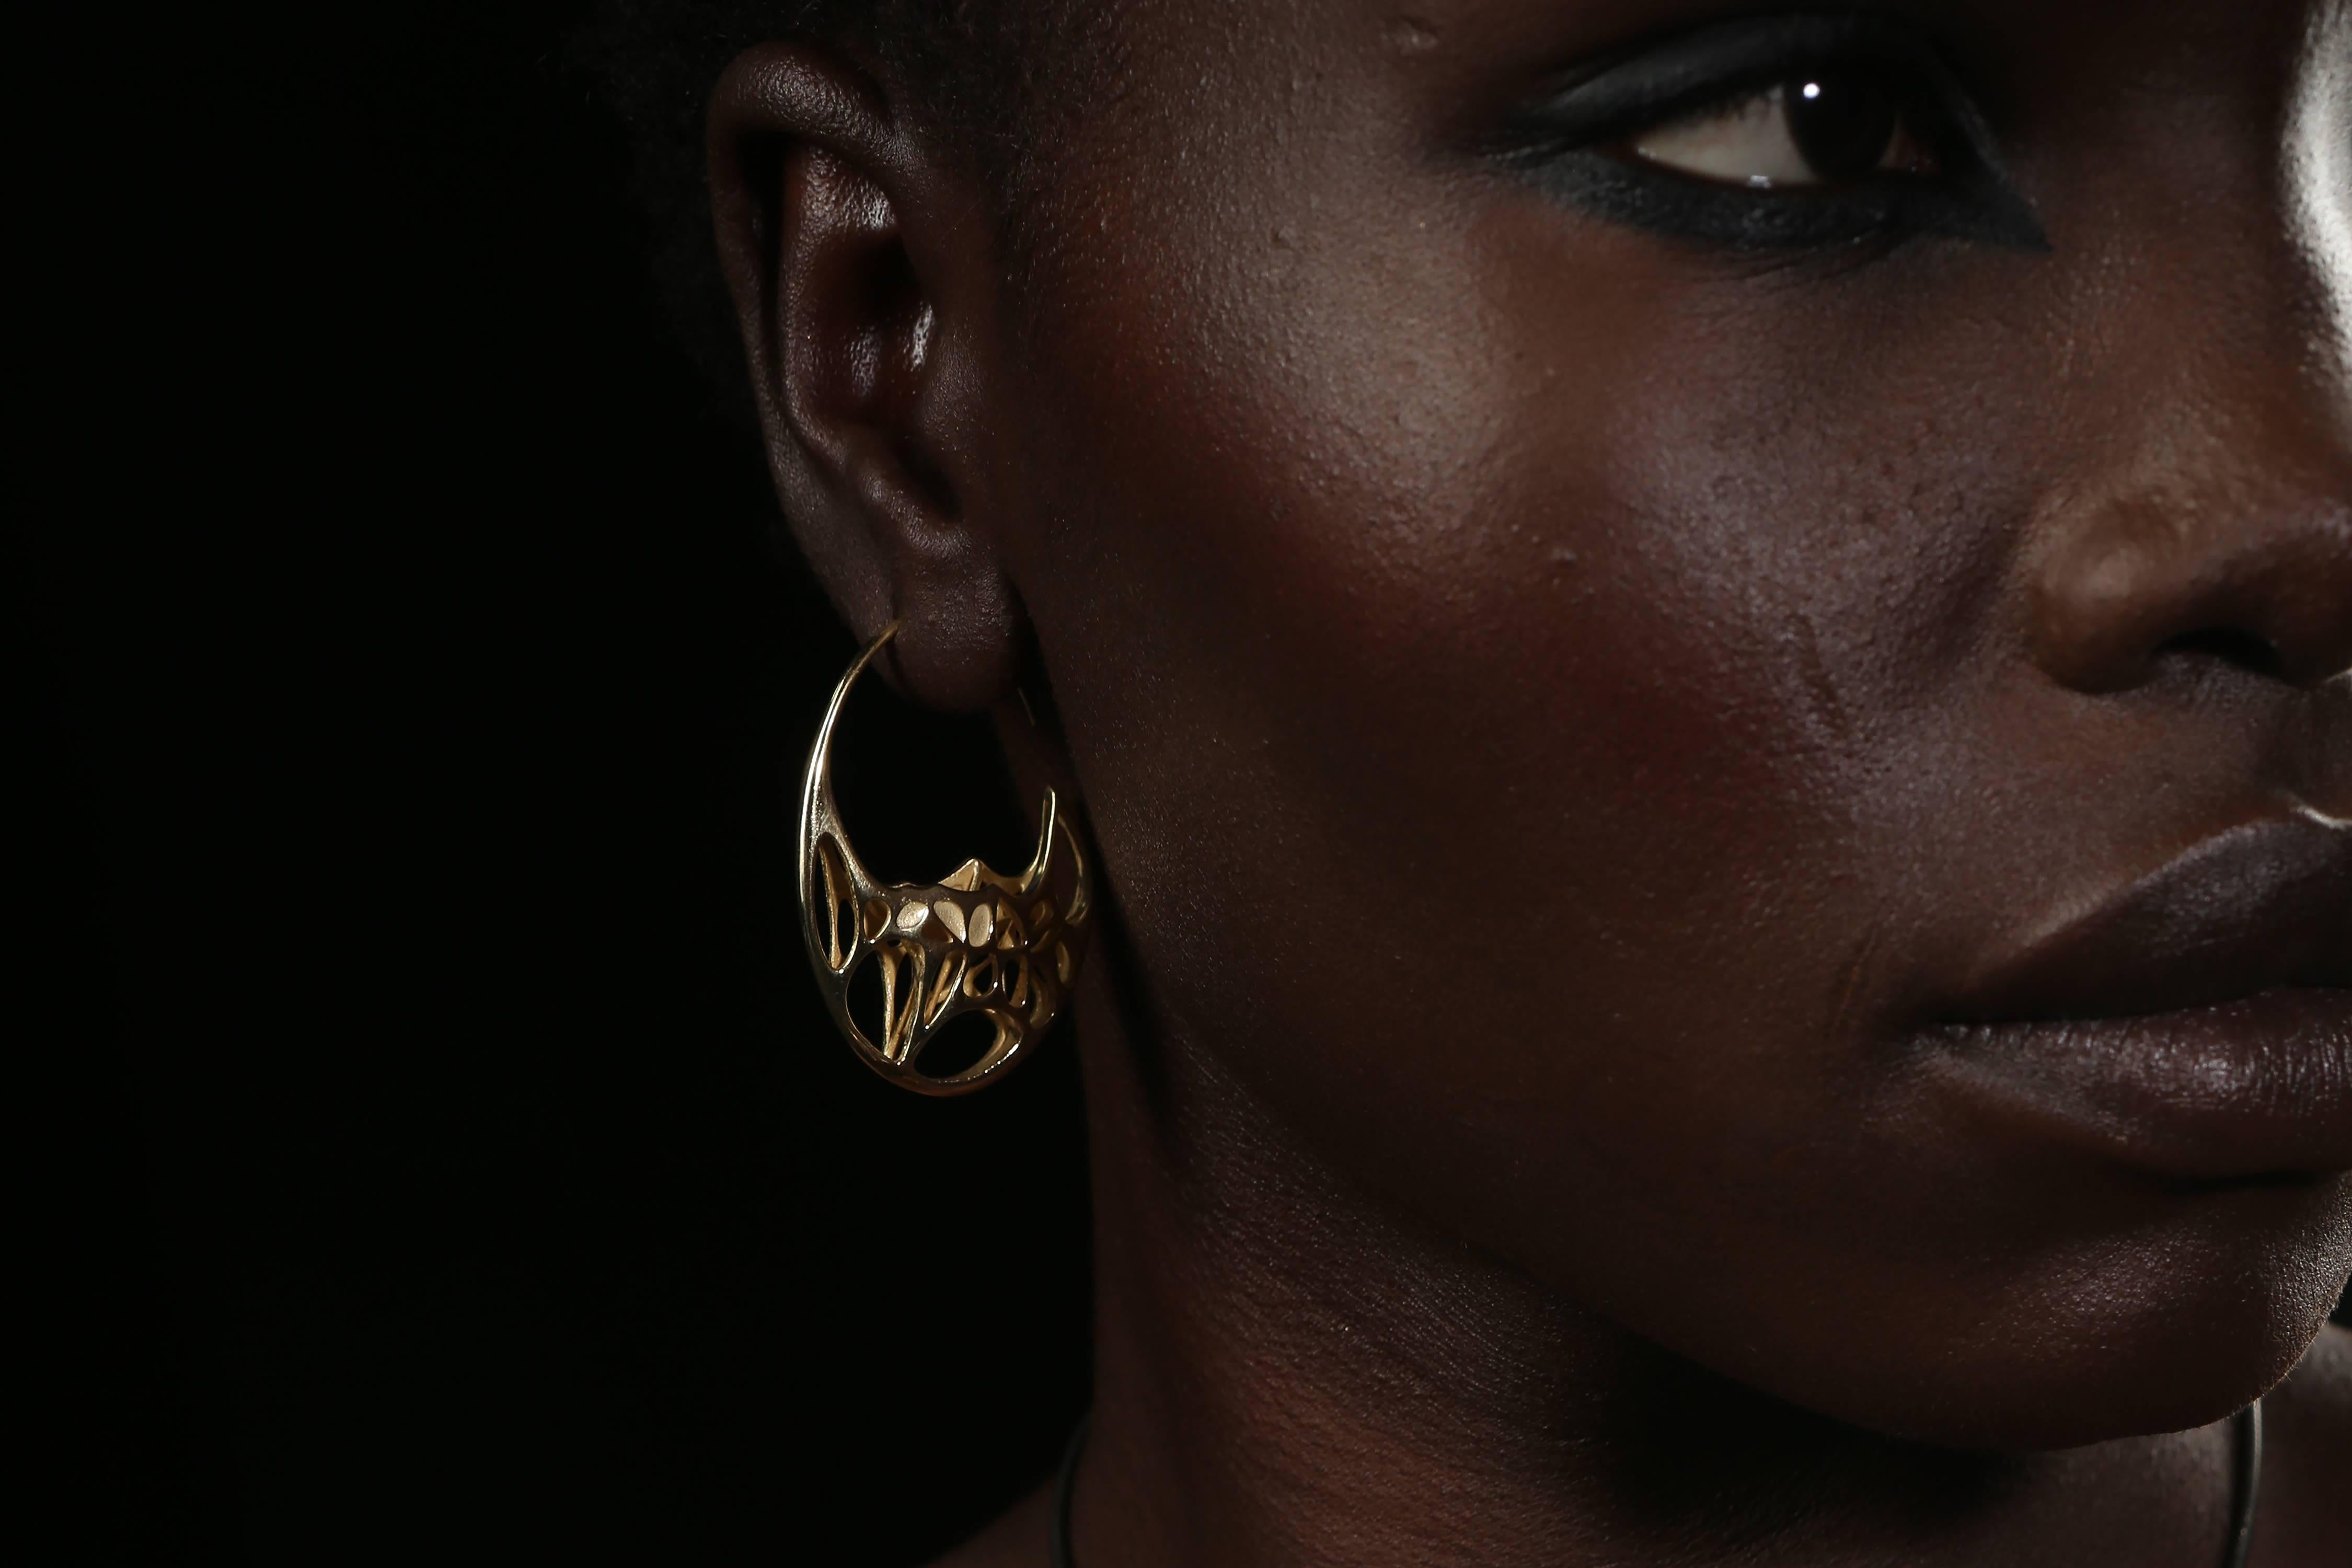 The GODA  hoop earrings are part of an innovative wearable art collection known as 